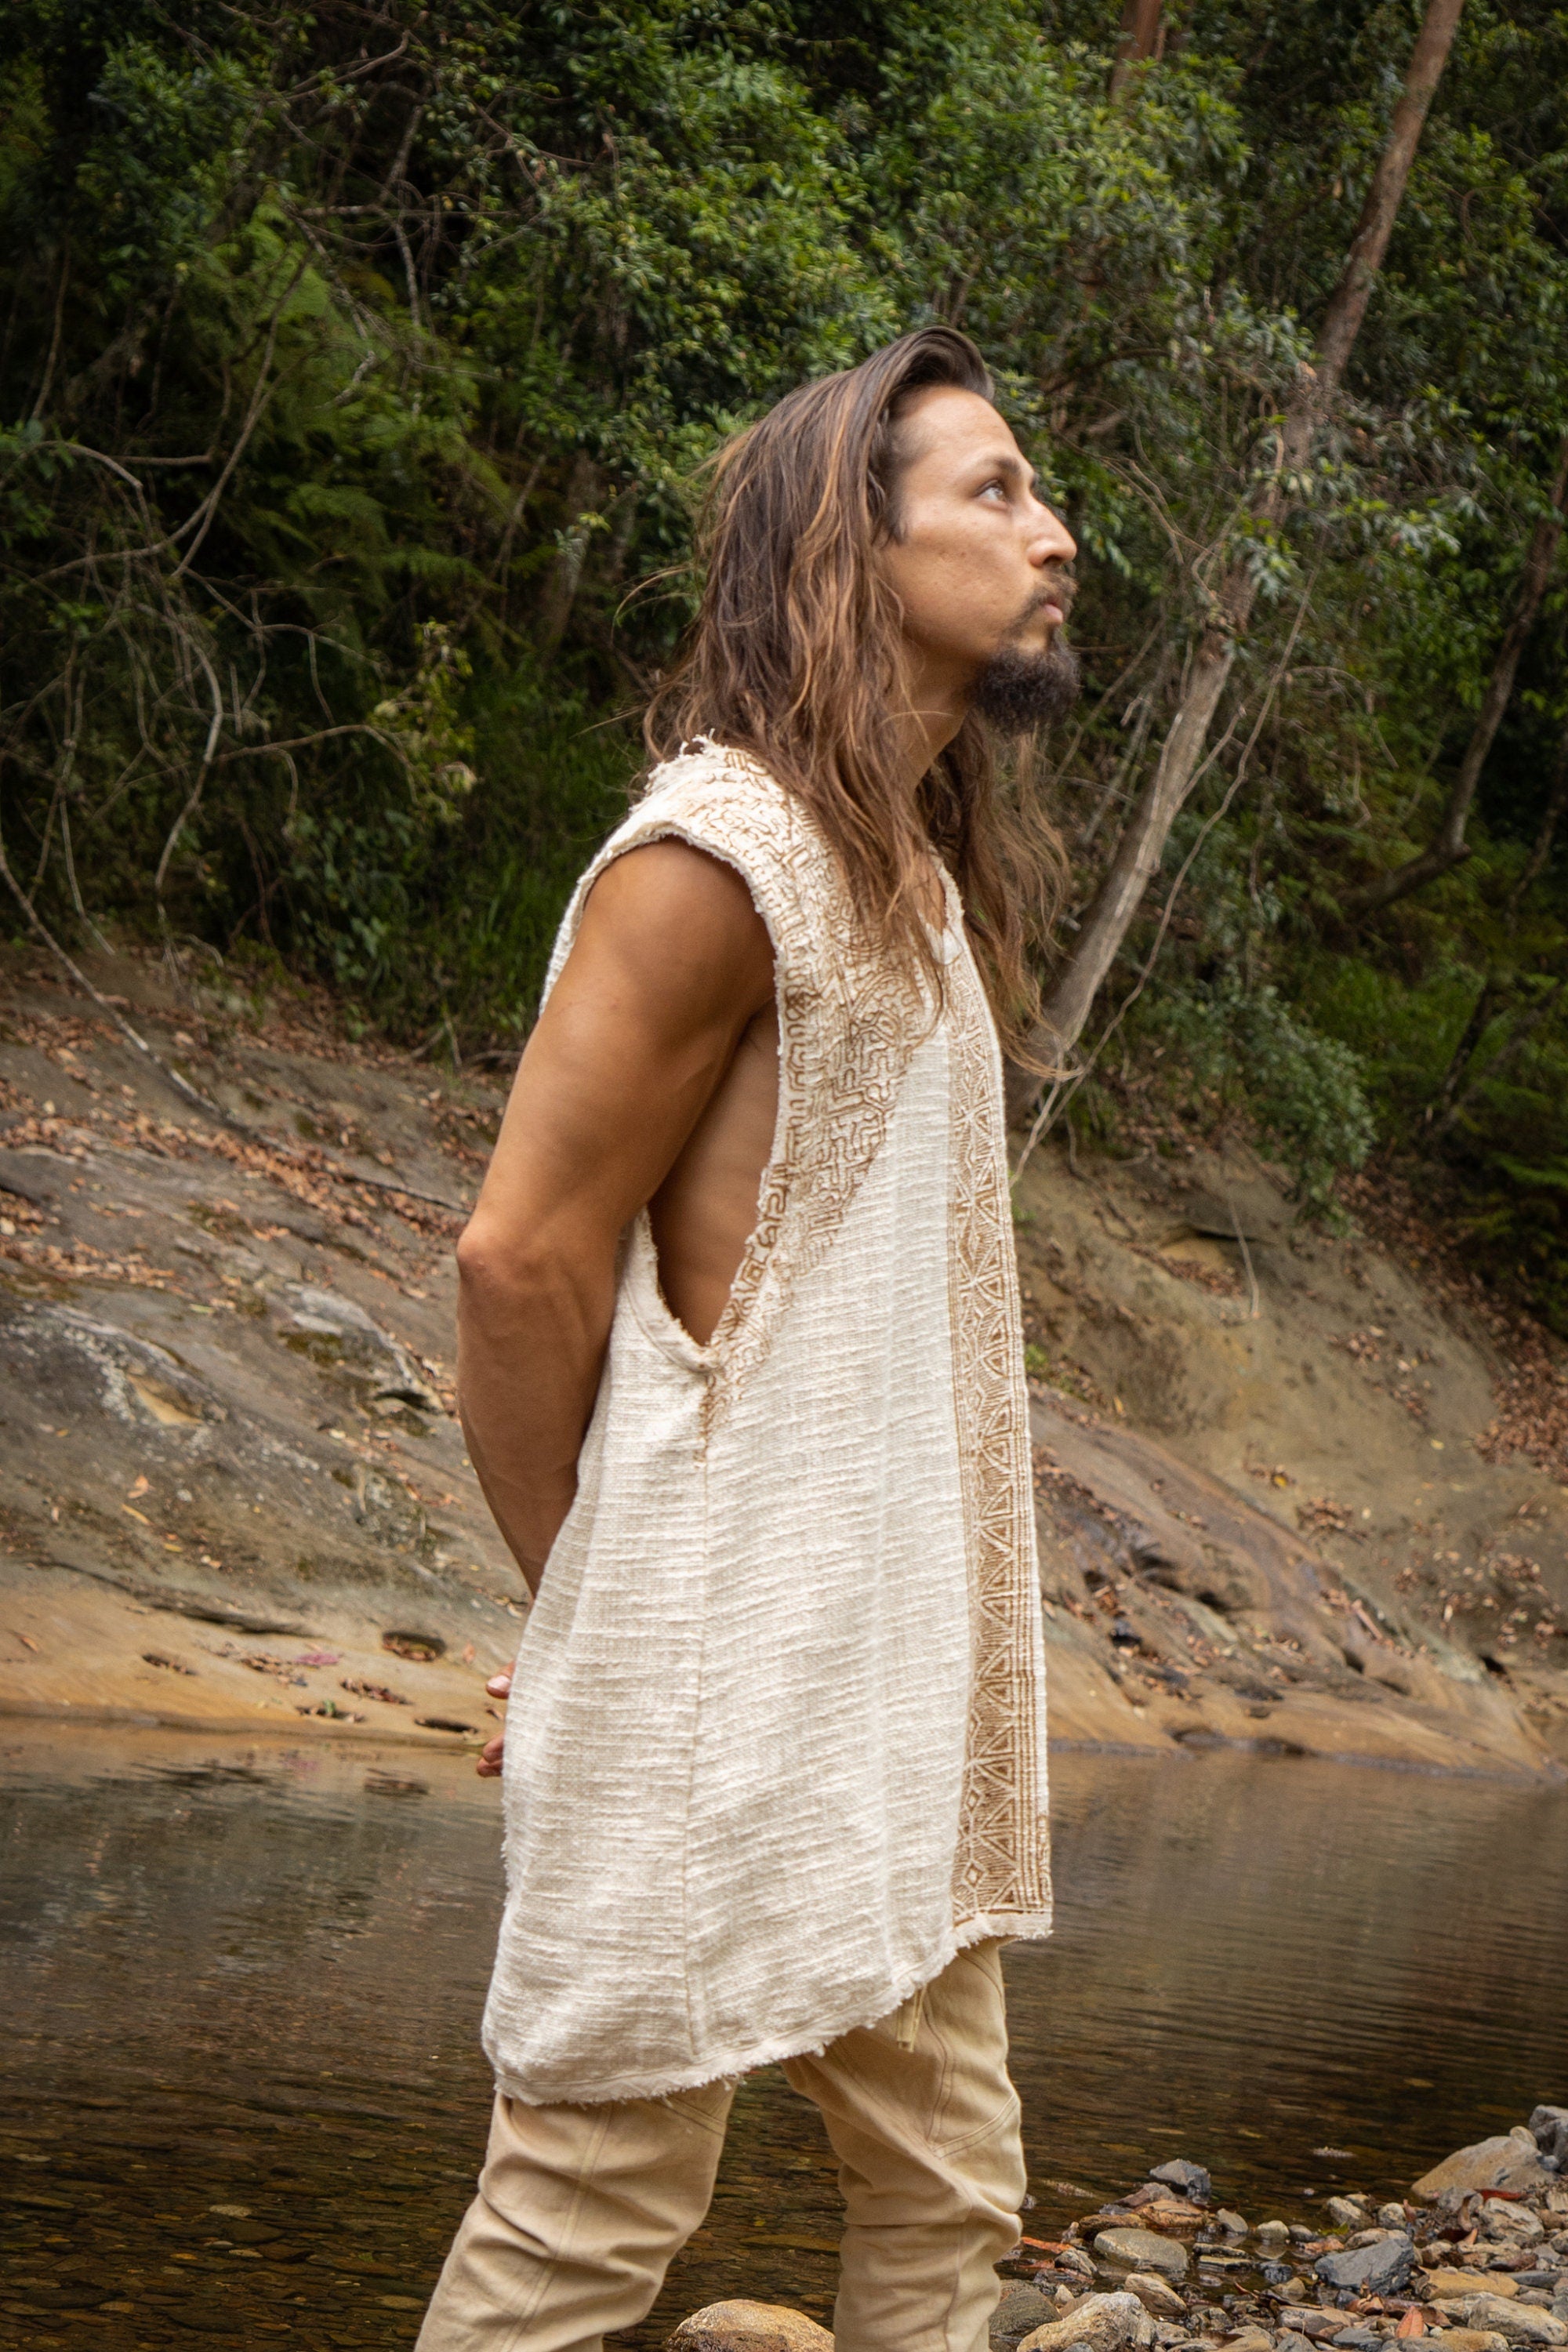 Our AKAU shamanic tank top features intricate block-printed shipibo tribal patterns that are hand-applied, giving each shirt a unique and authentic touch..